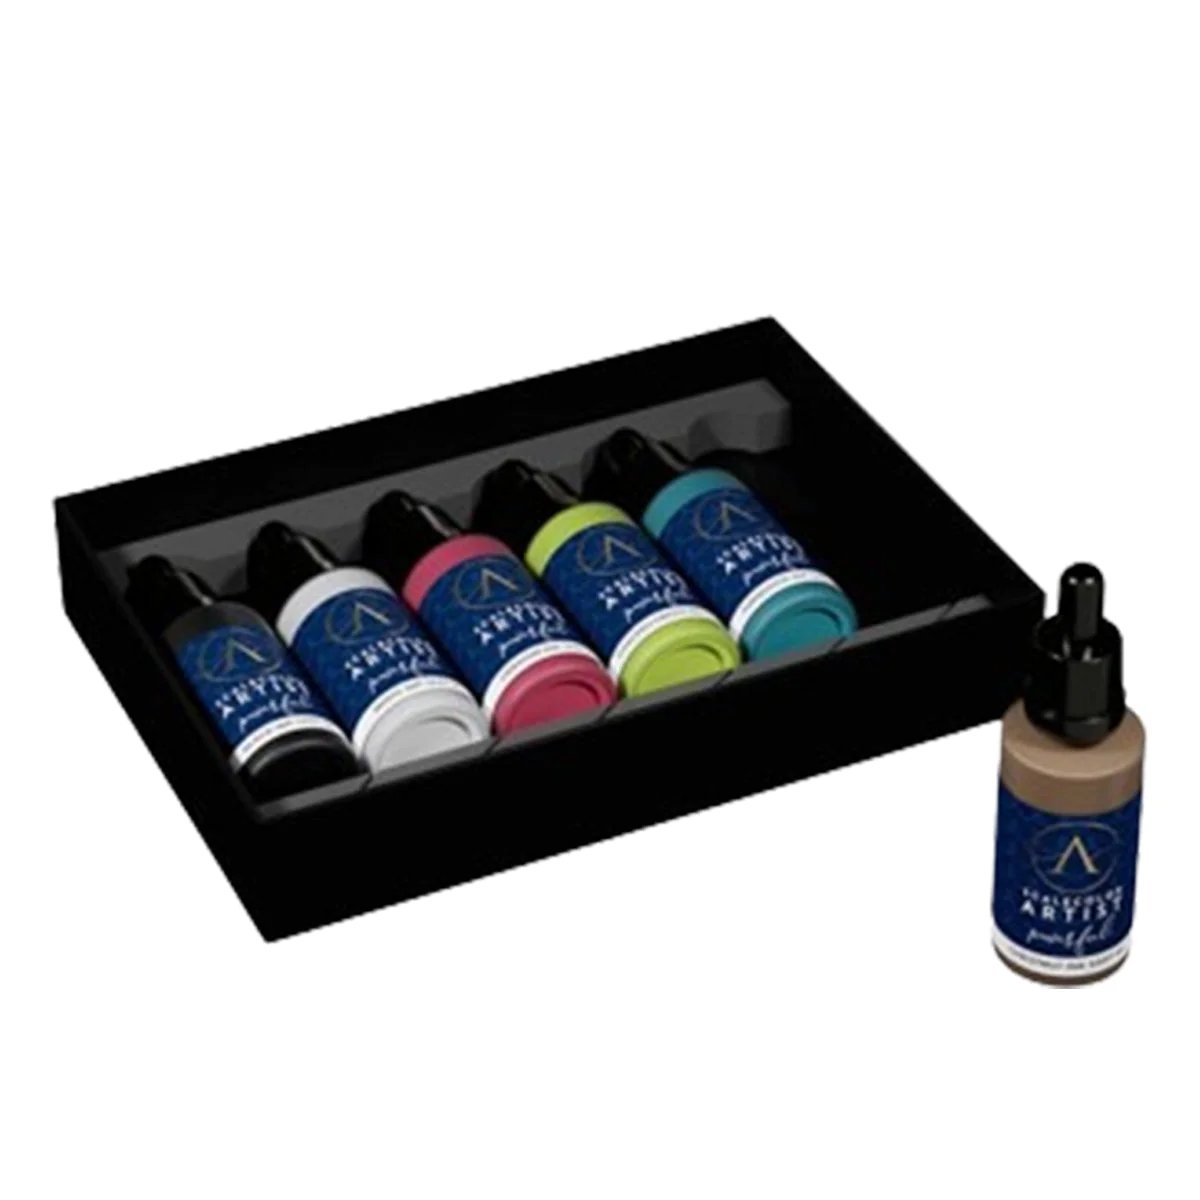 Scale 75 Scalecolor Artist Game of Inks Paint Set